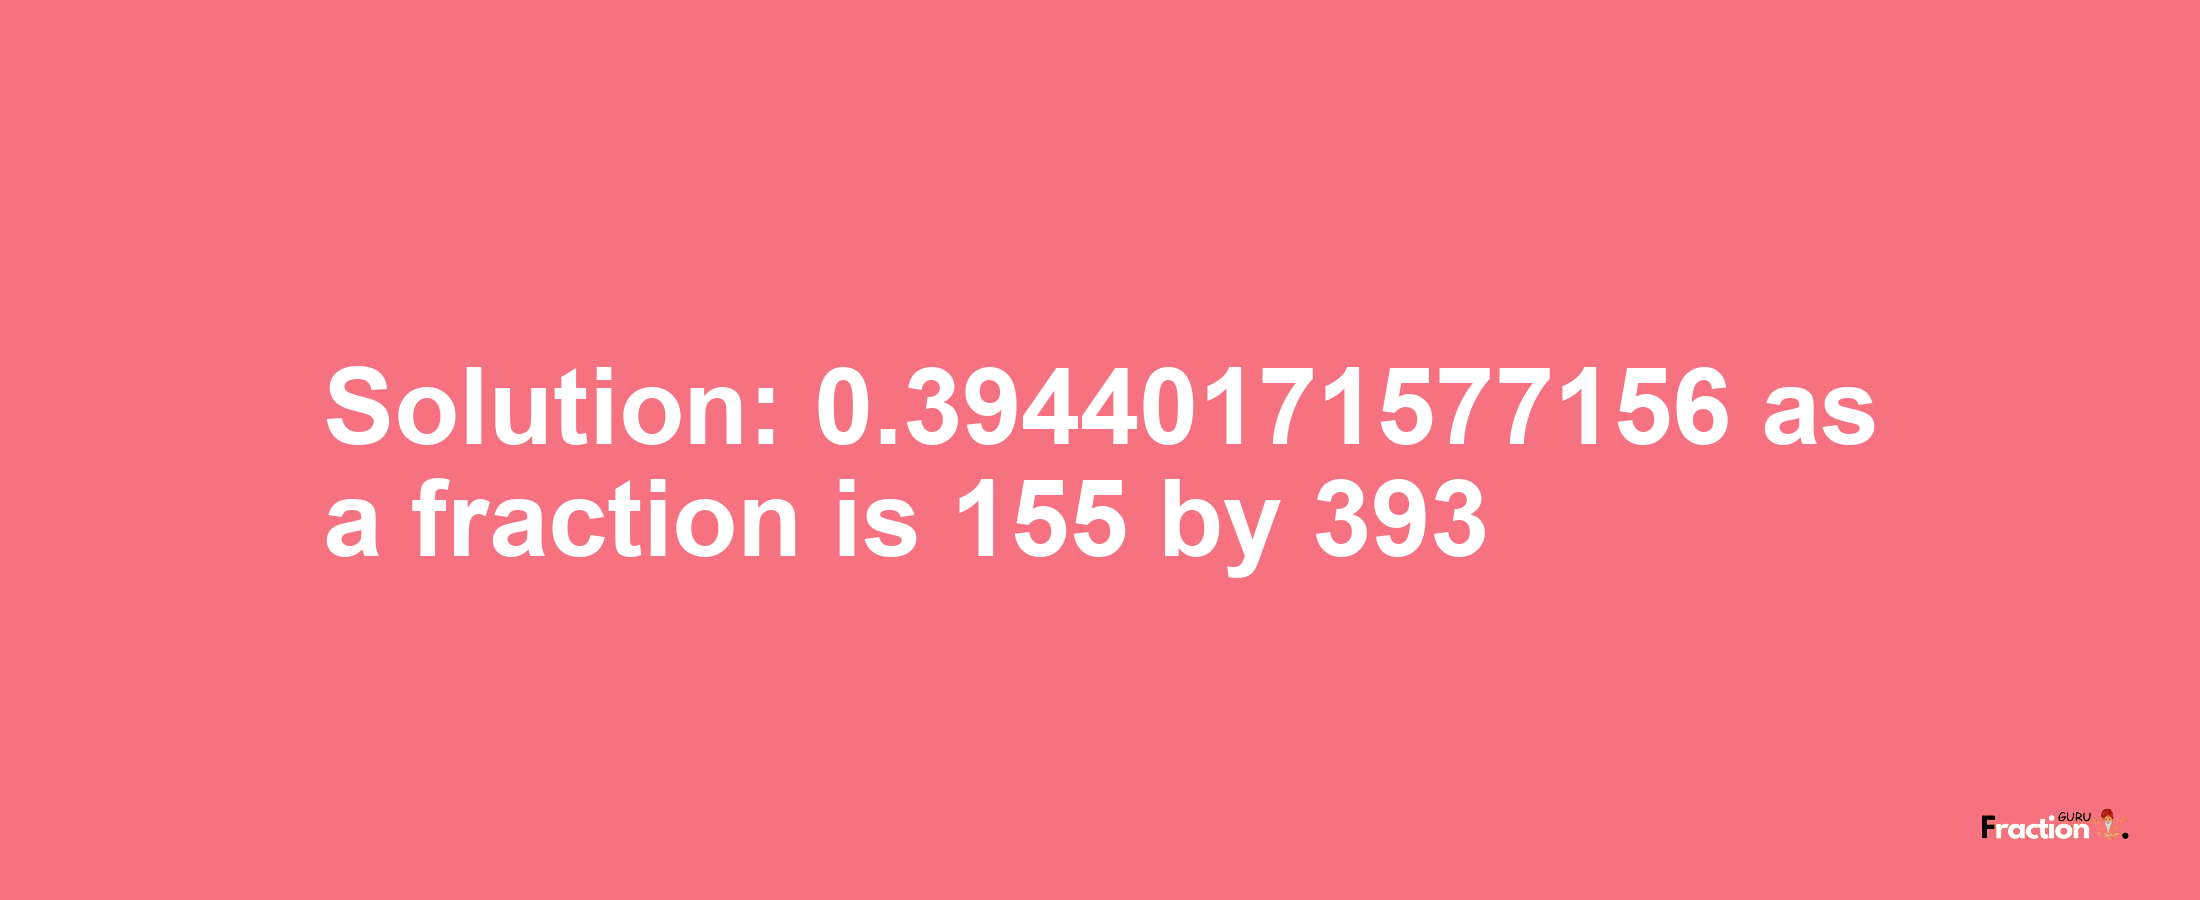 Solution:0.39440171577156 as a fraction is 155/393